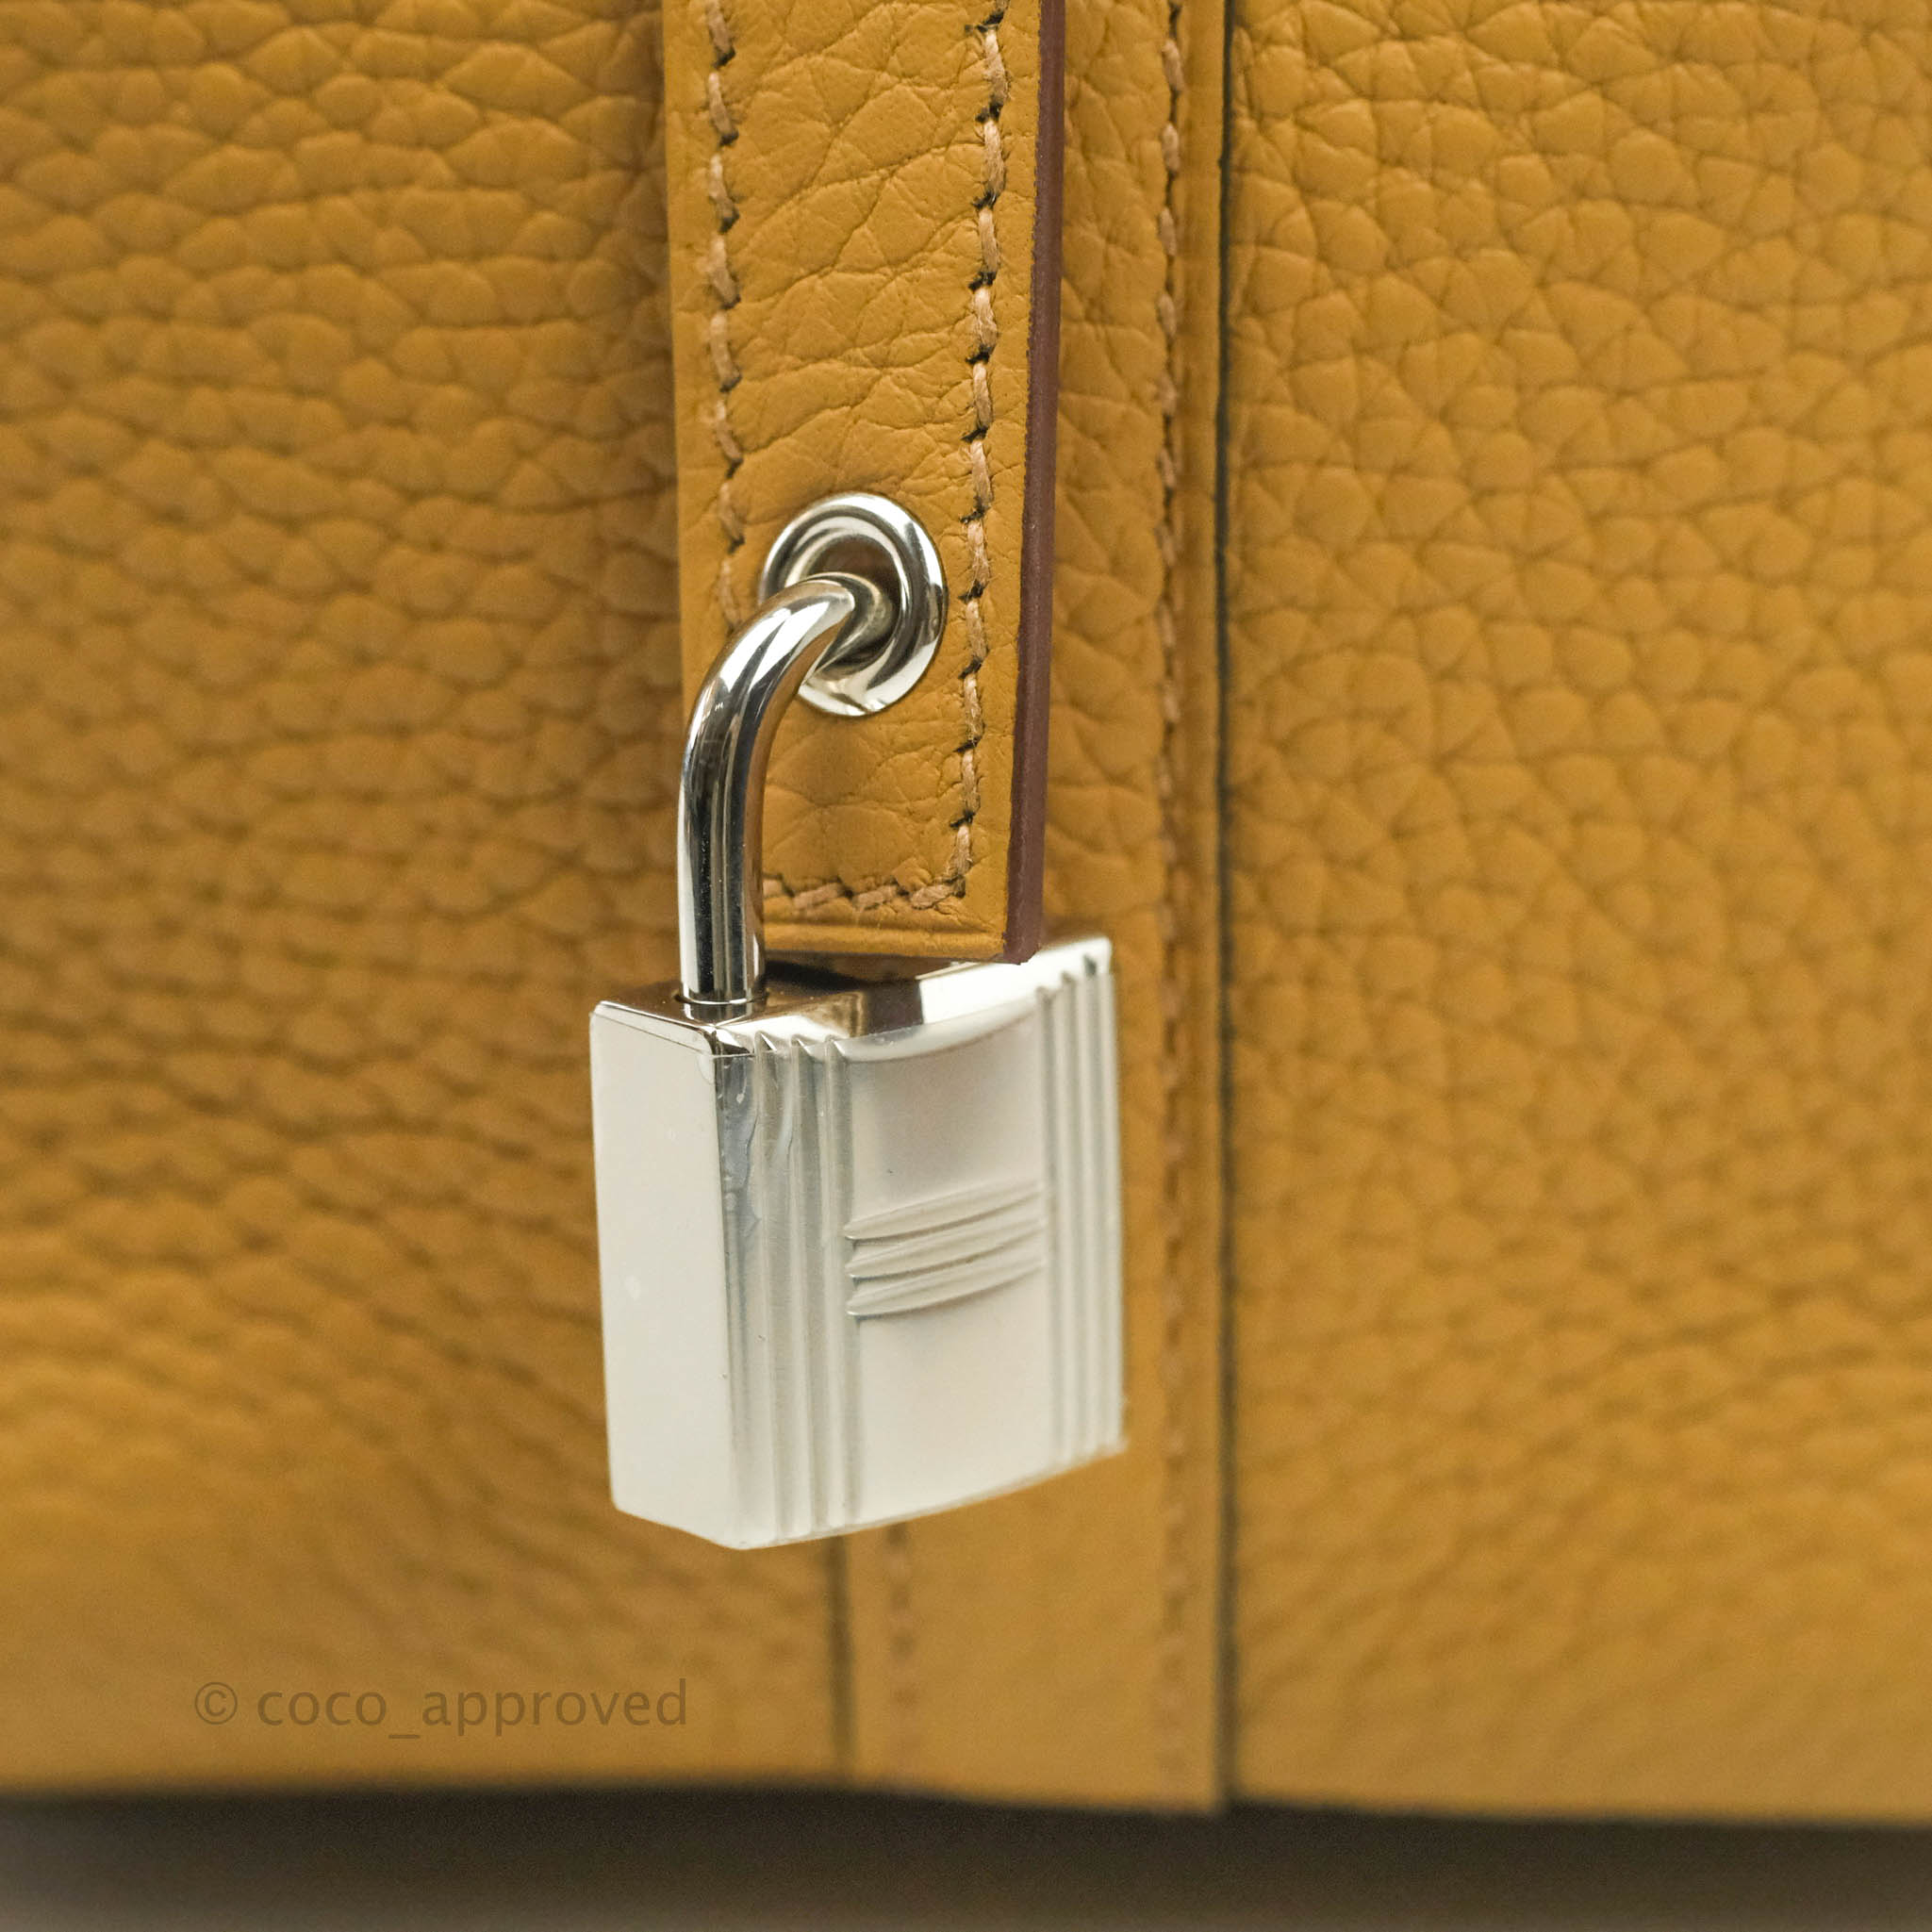 Hermes　Picotin Lock bag PM　Biscuit　Clemence leather　Silver hardware